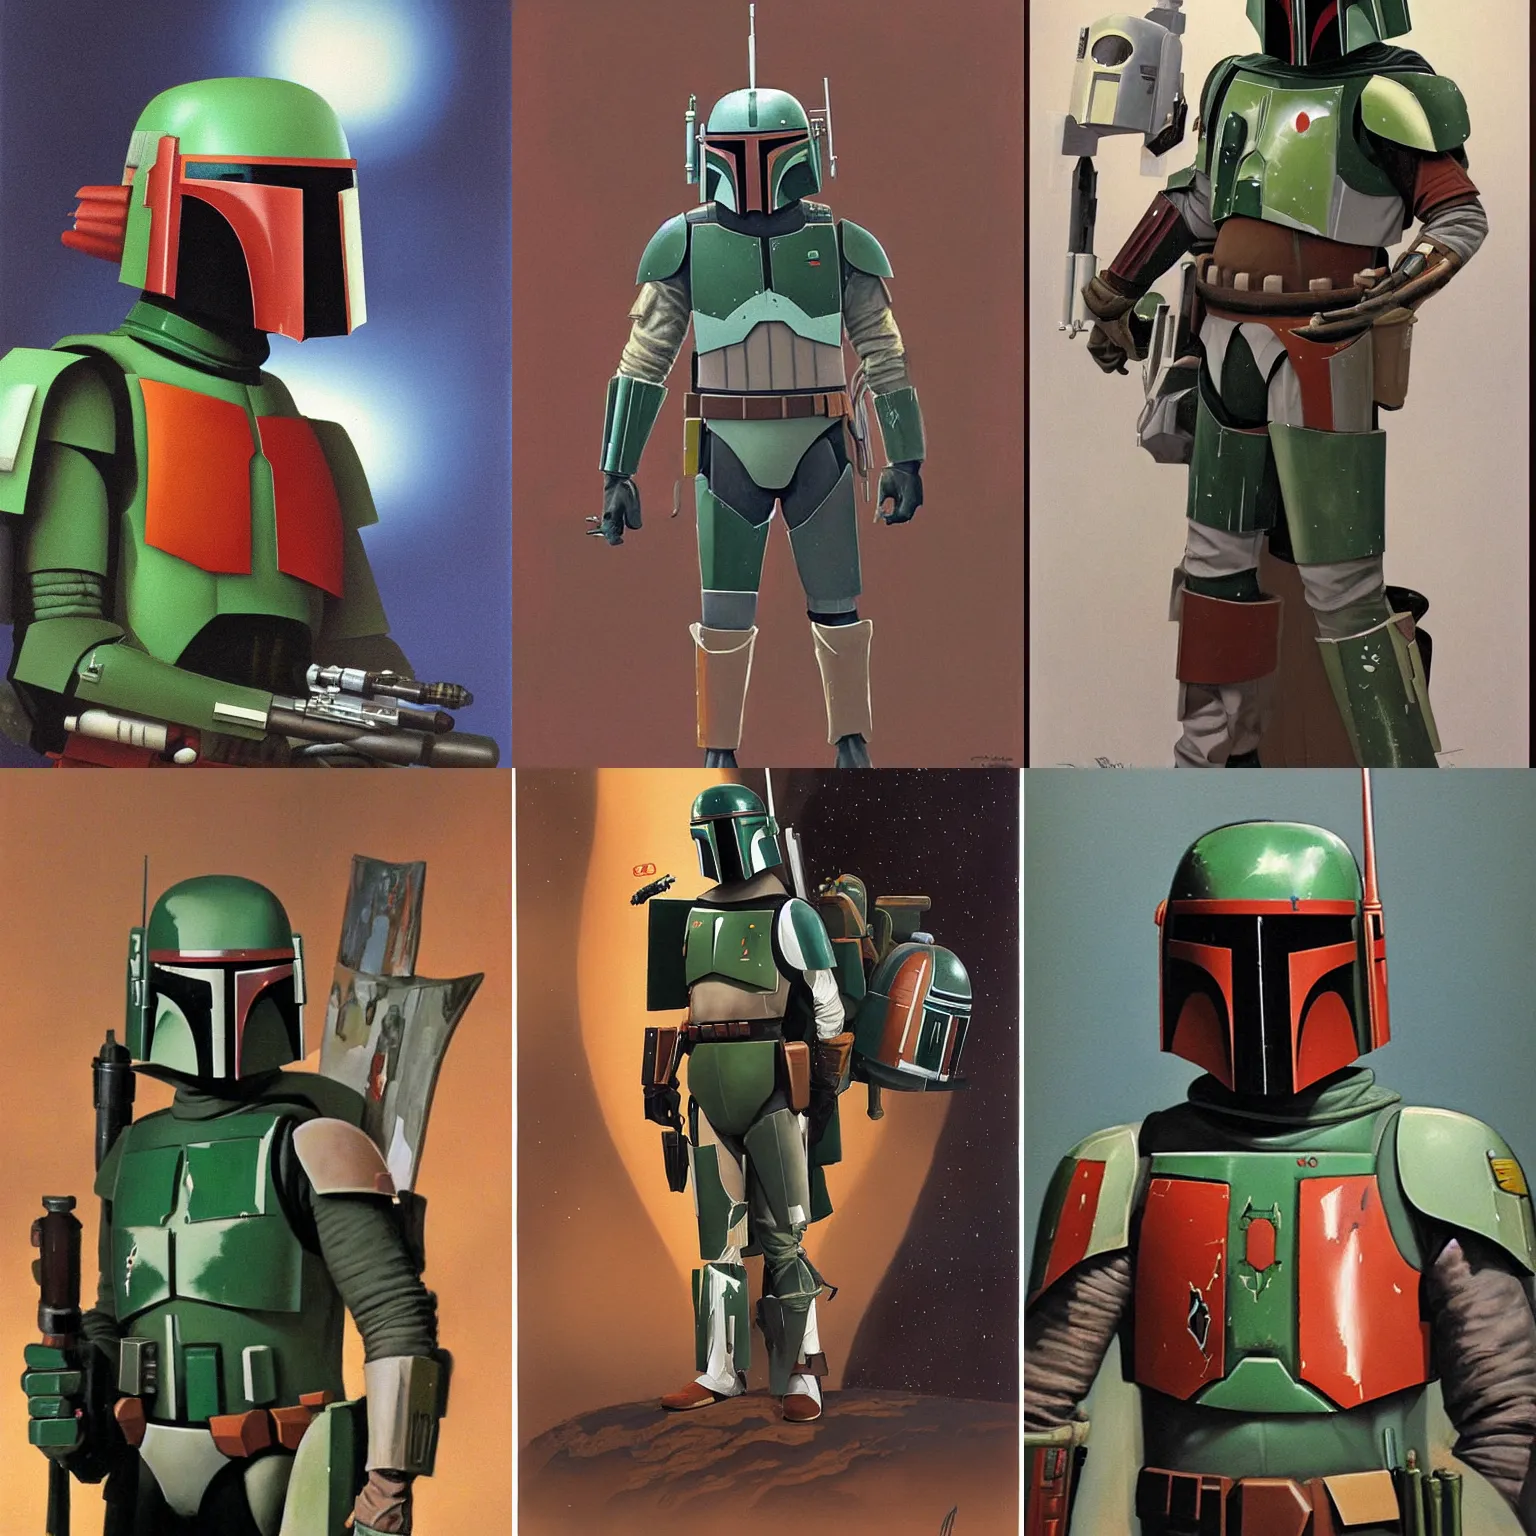 Prompt: portrait of boba fett, painting by ralph mcquarrie